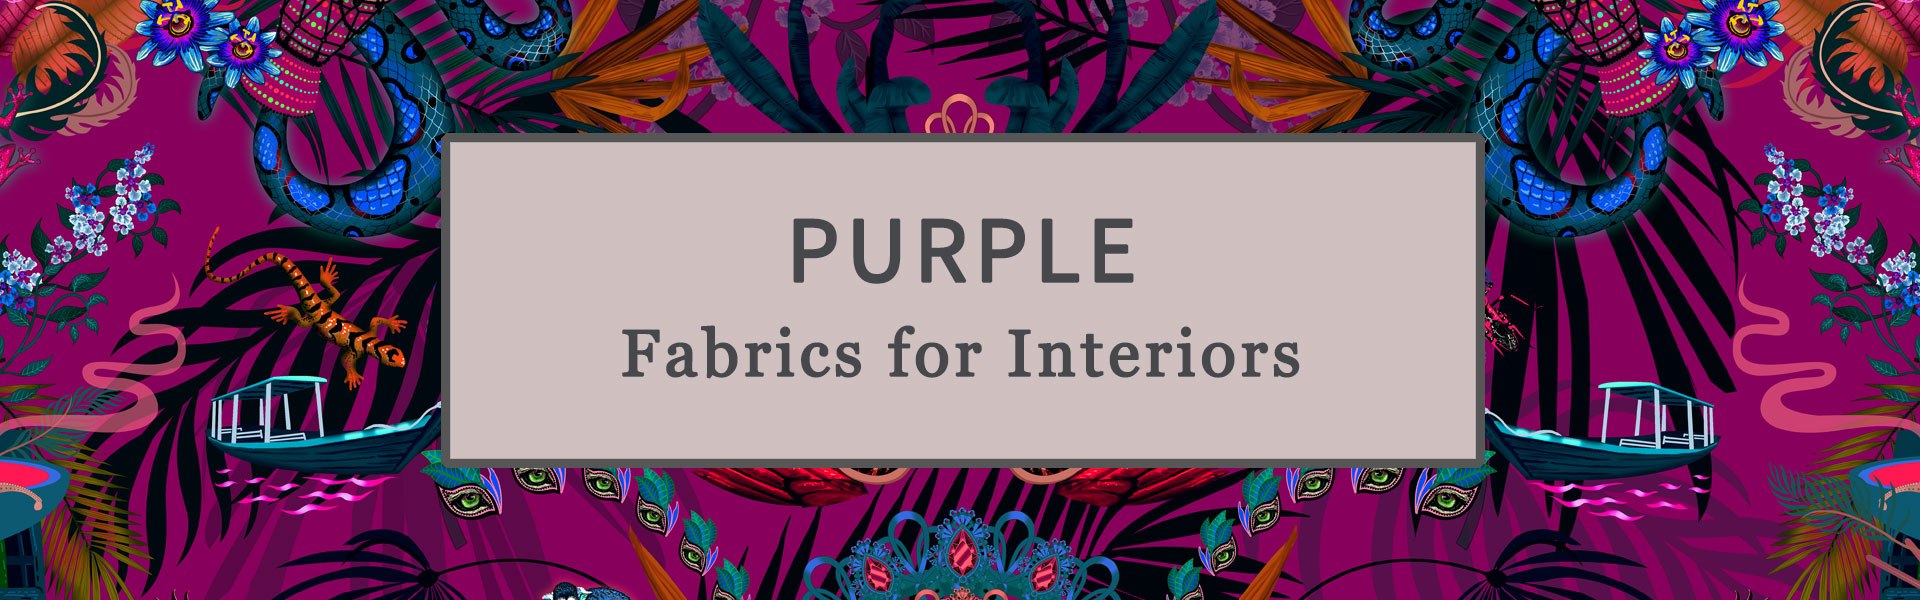 Purple Fabric for Interiors, Upholstery, Curtains & Soft Furnishings by Designer, Becca Who